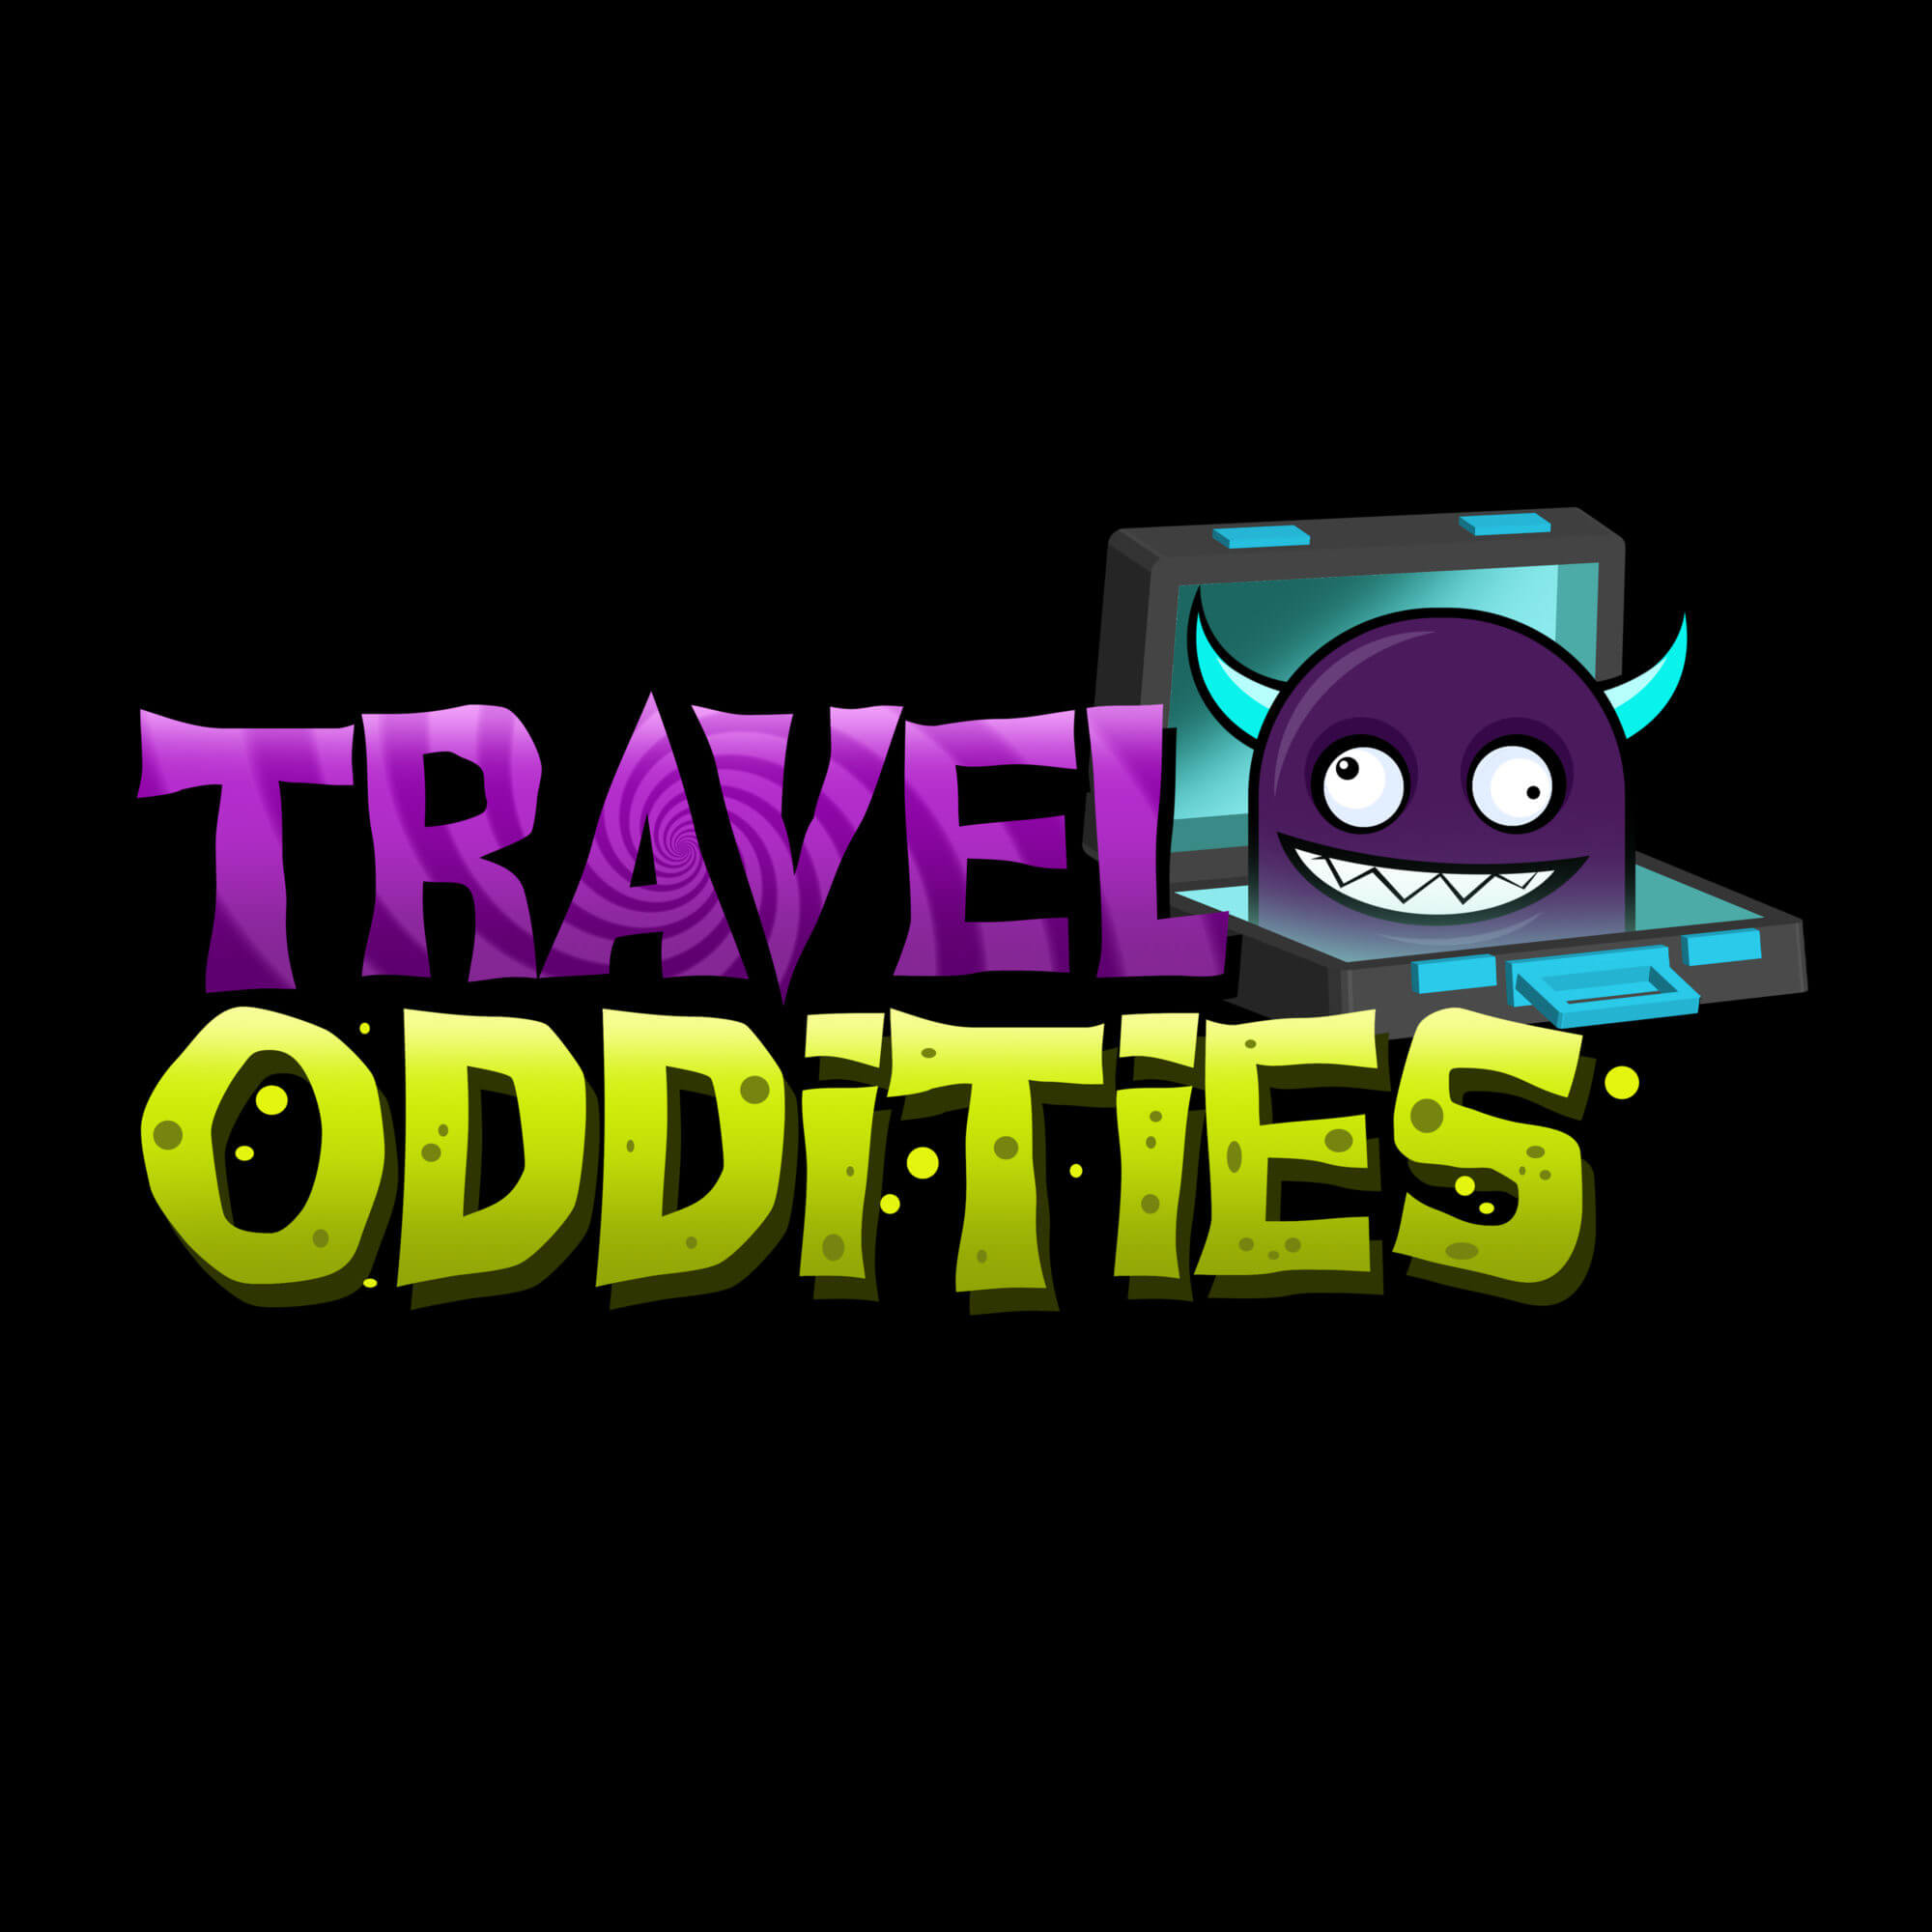 Travel Oddities: A Road Trip to Mystery